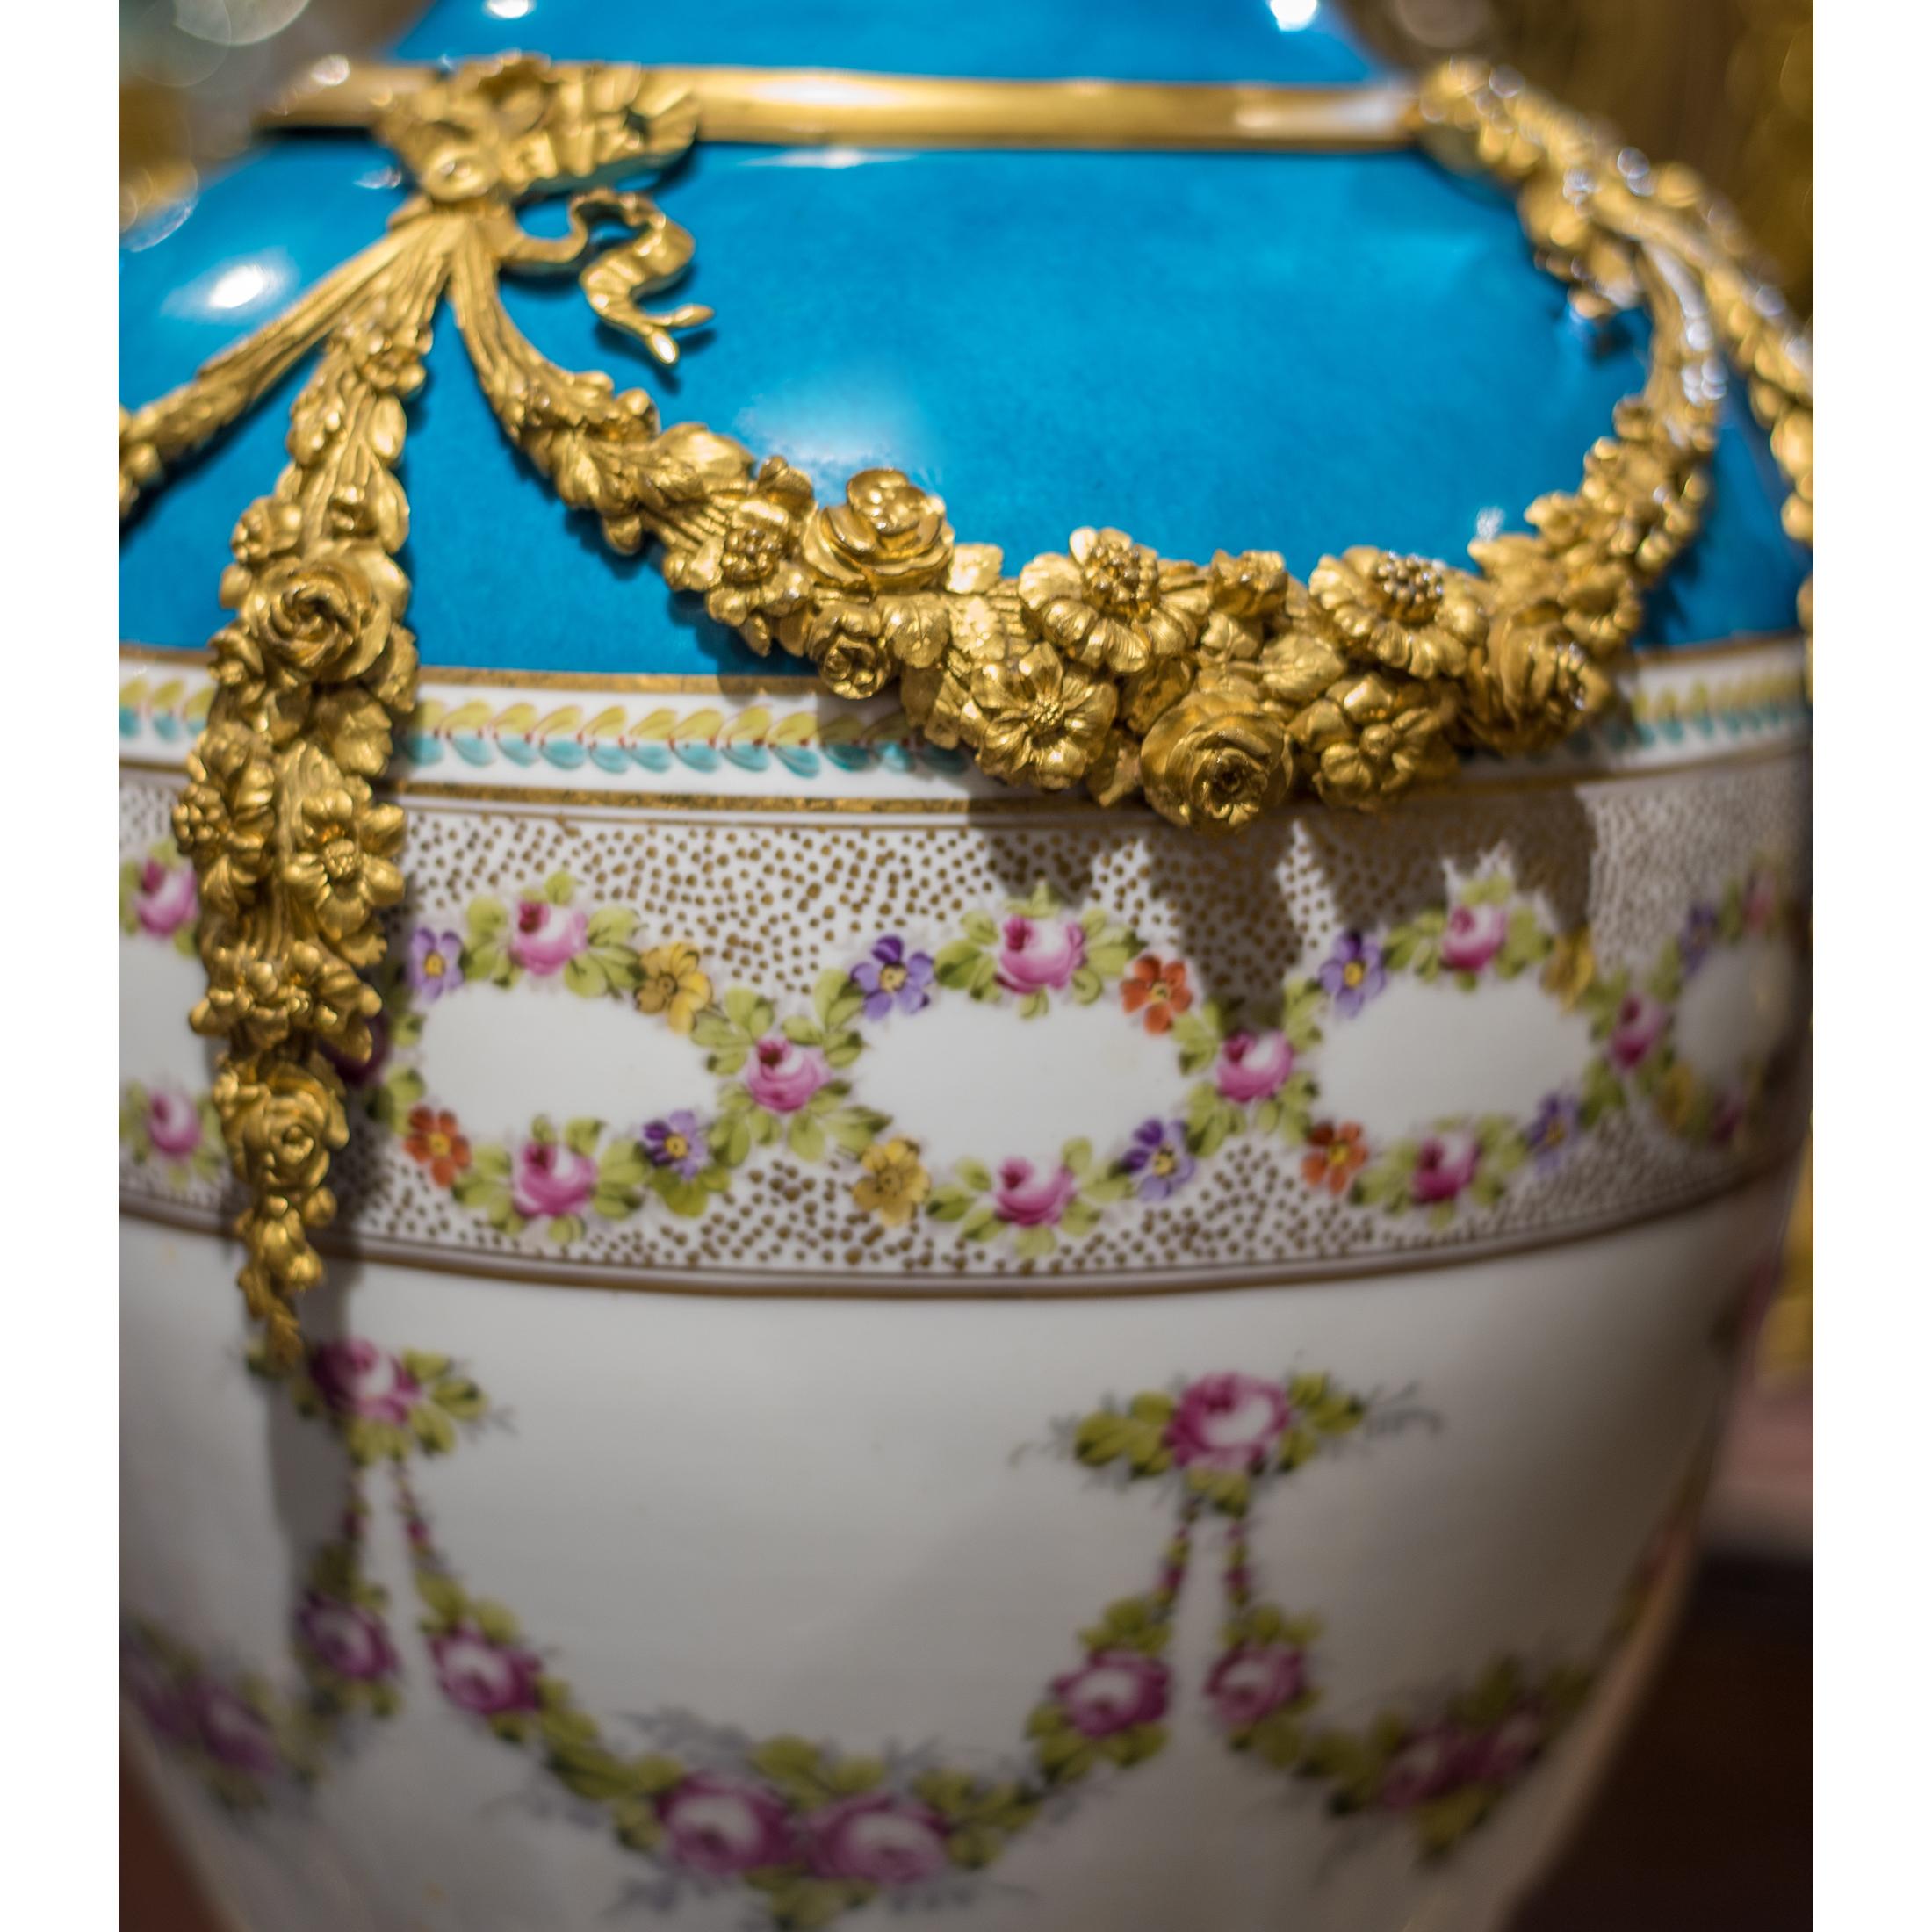 A Fine quality Sèvres-style ormolu-mounted porcelain bleu vase. The oviform vase flanked by ormolu garlands, finely painted floral design.

Date: Late 19th century
Origin: French
Dimension: 28 1/2 x 14 inches.